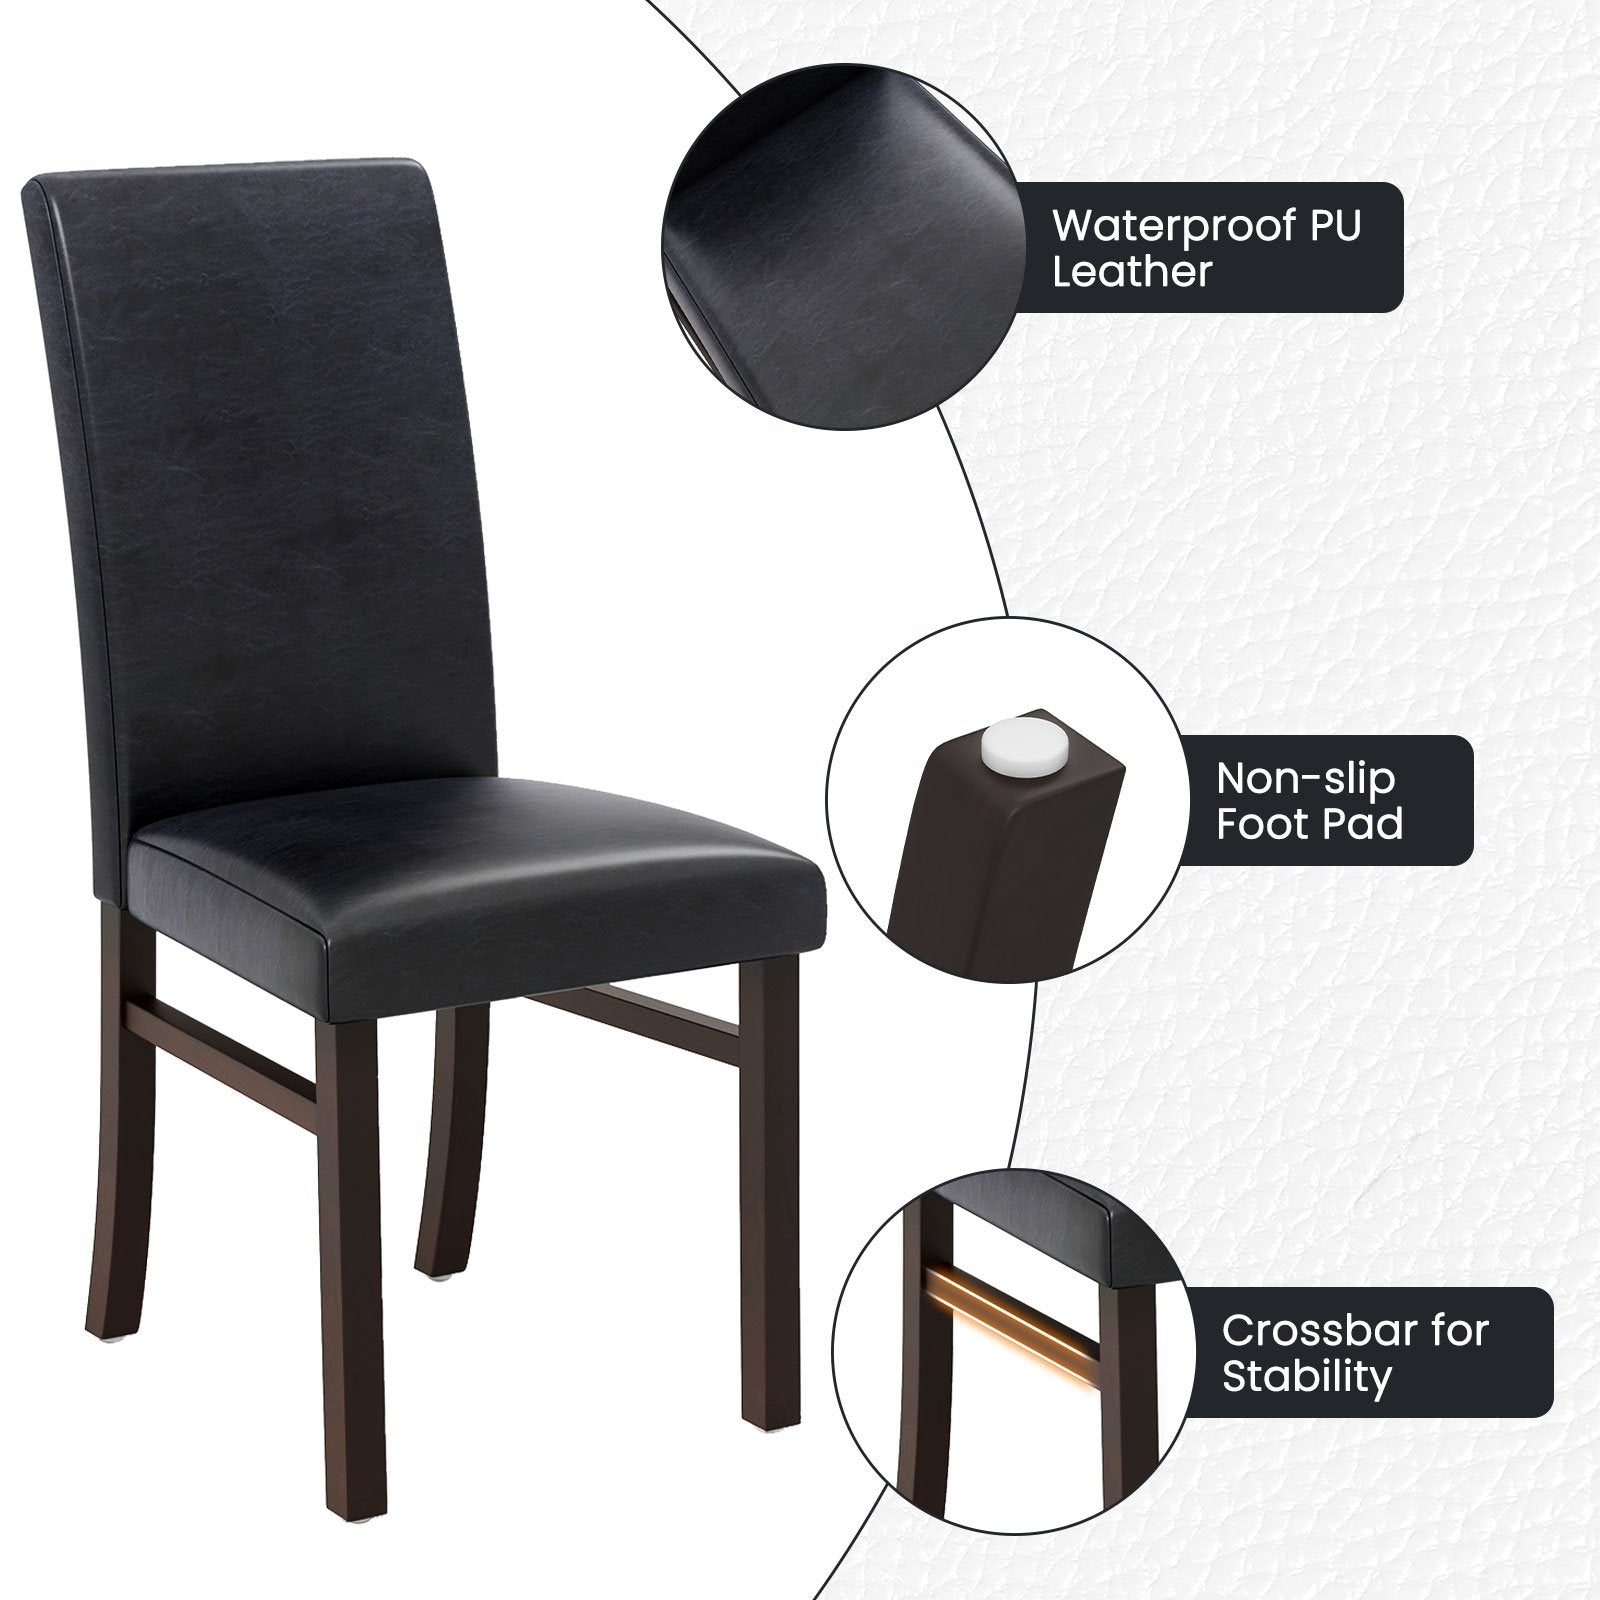 Upholstered Dining Chairs Set of 2 with Solid Rubber Wood Legs, Black - Gallery Canada